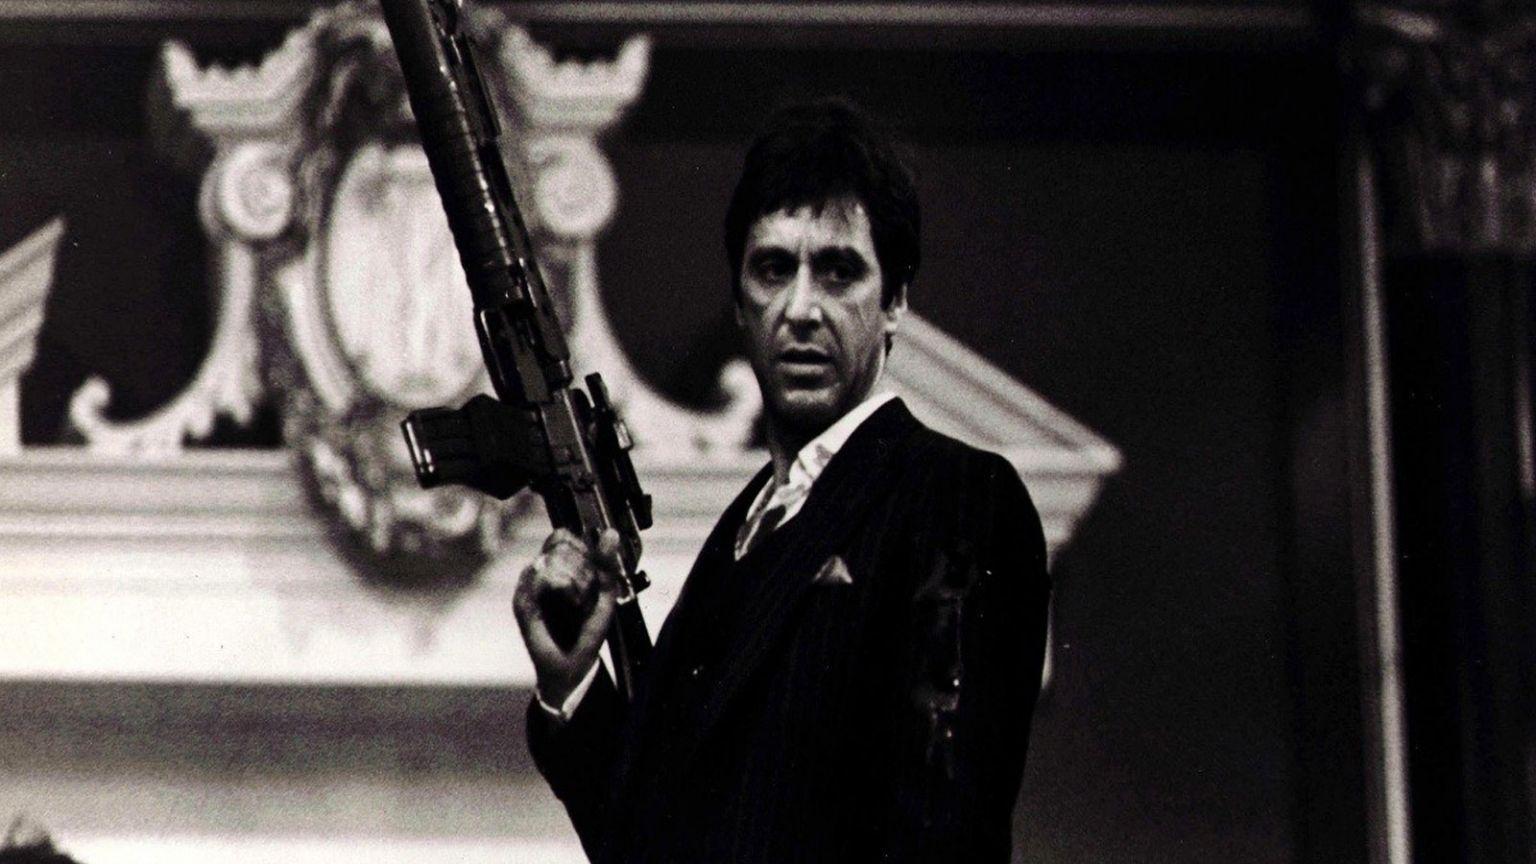 download scarface pc